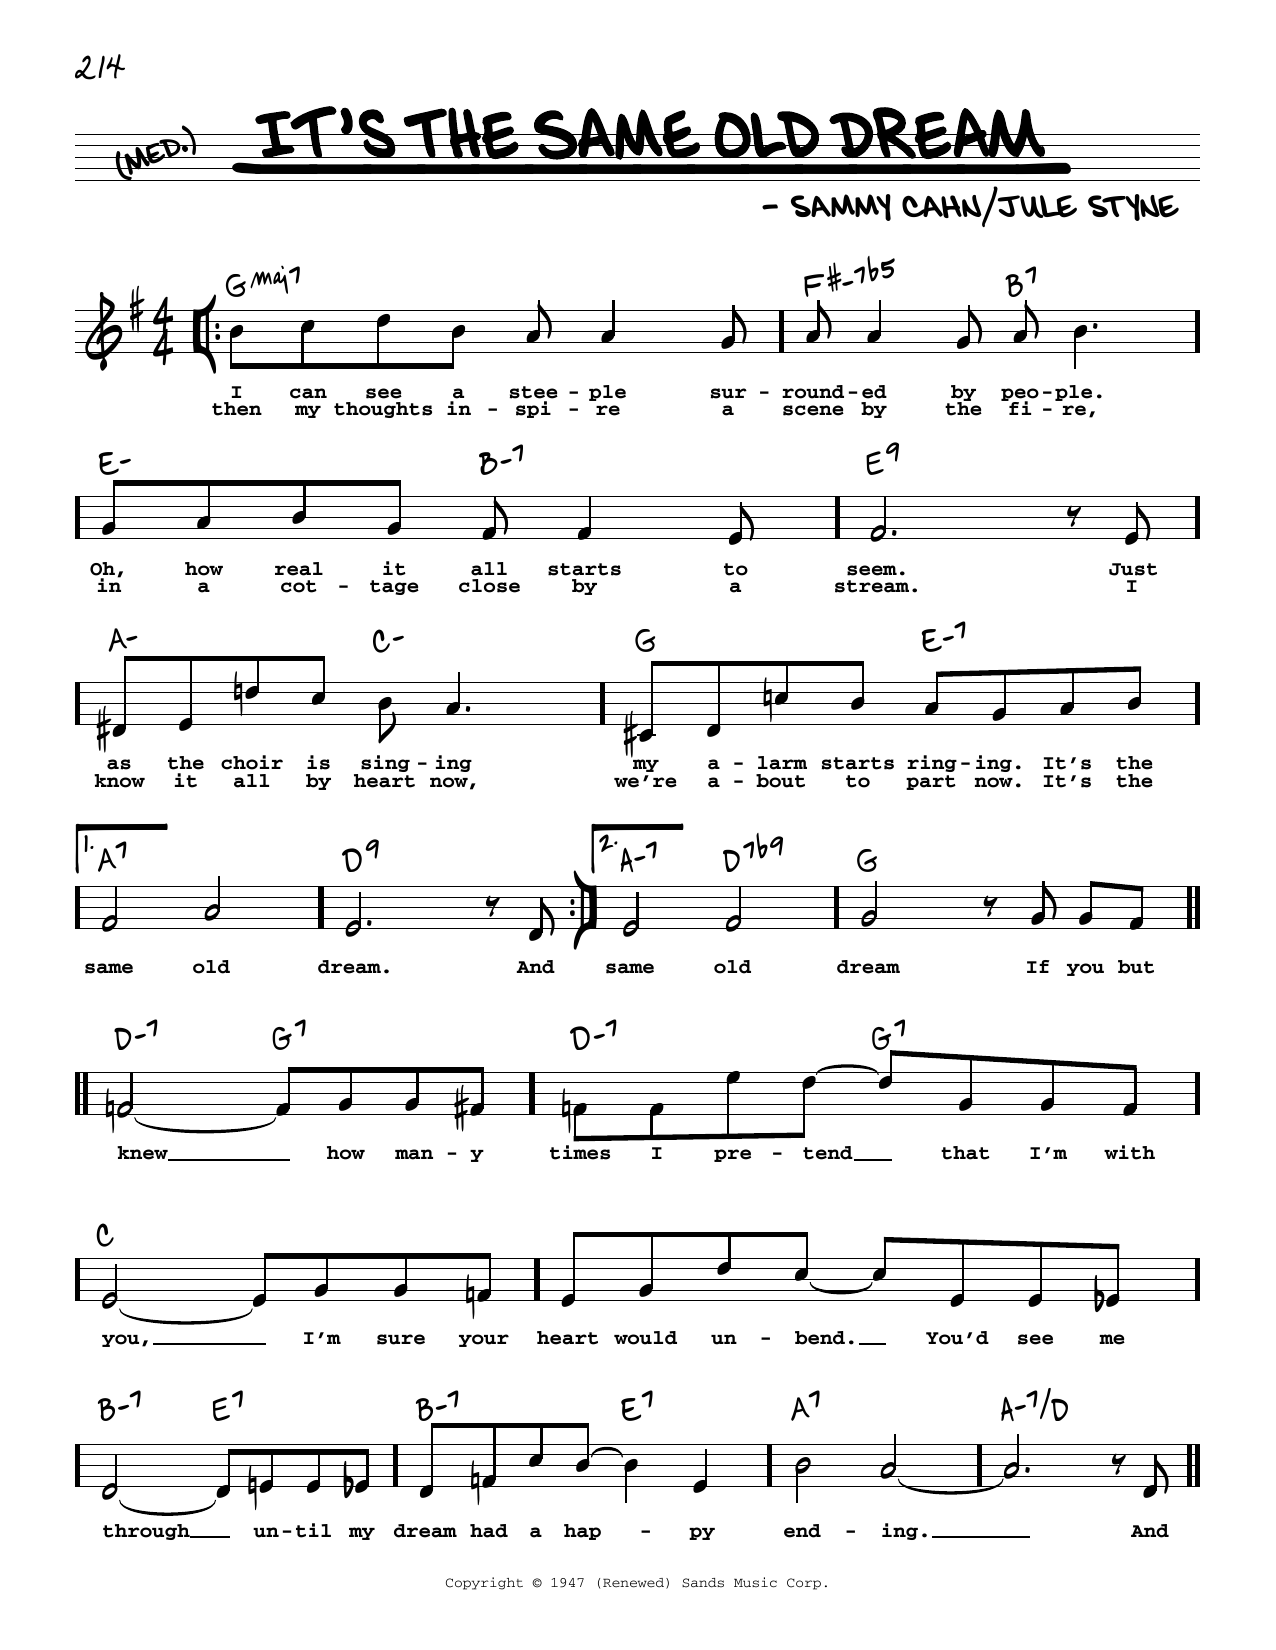 Download Jule Styne It's The Same Old Dream (High Voice) Sheet Music